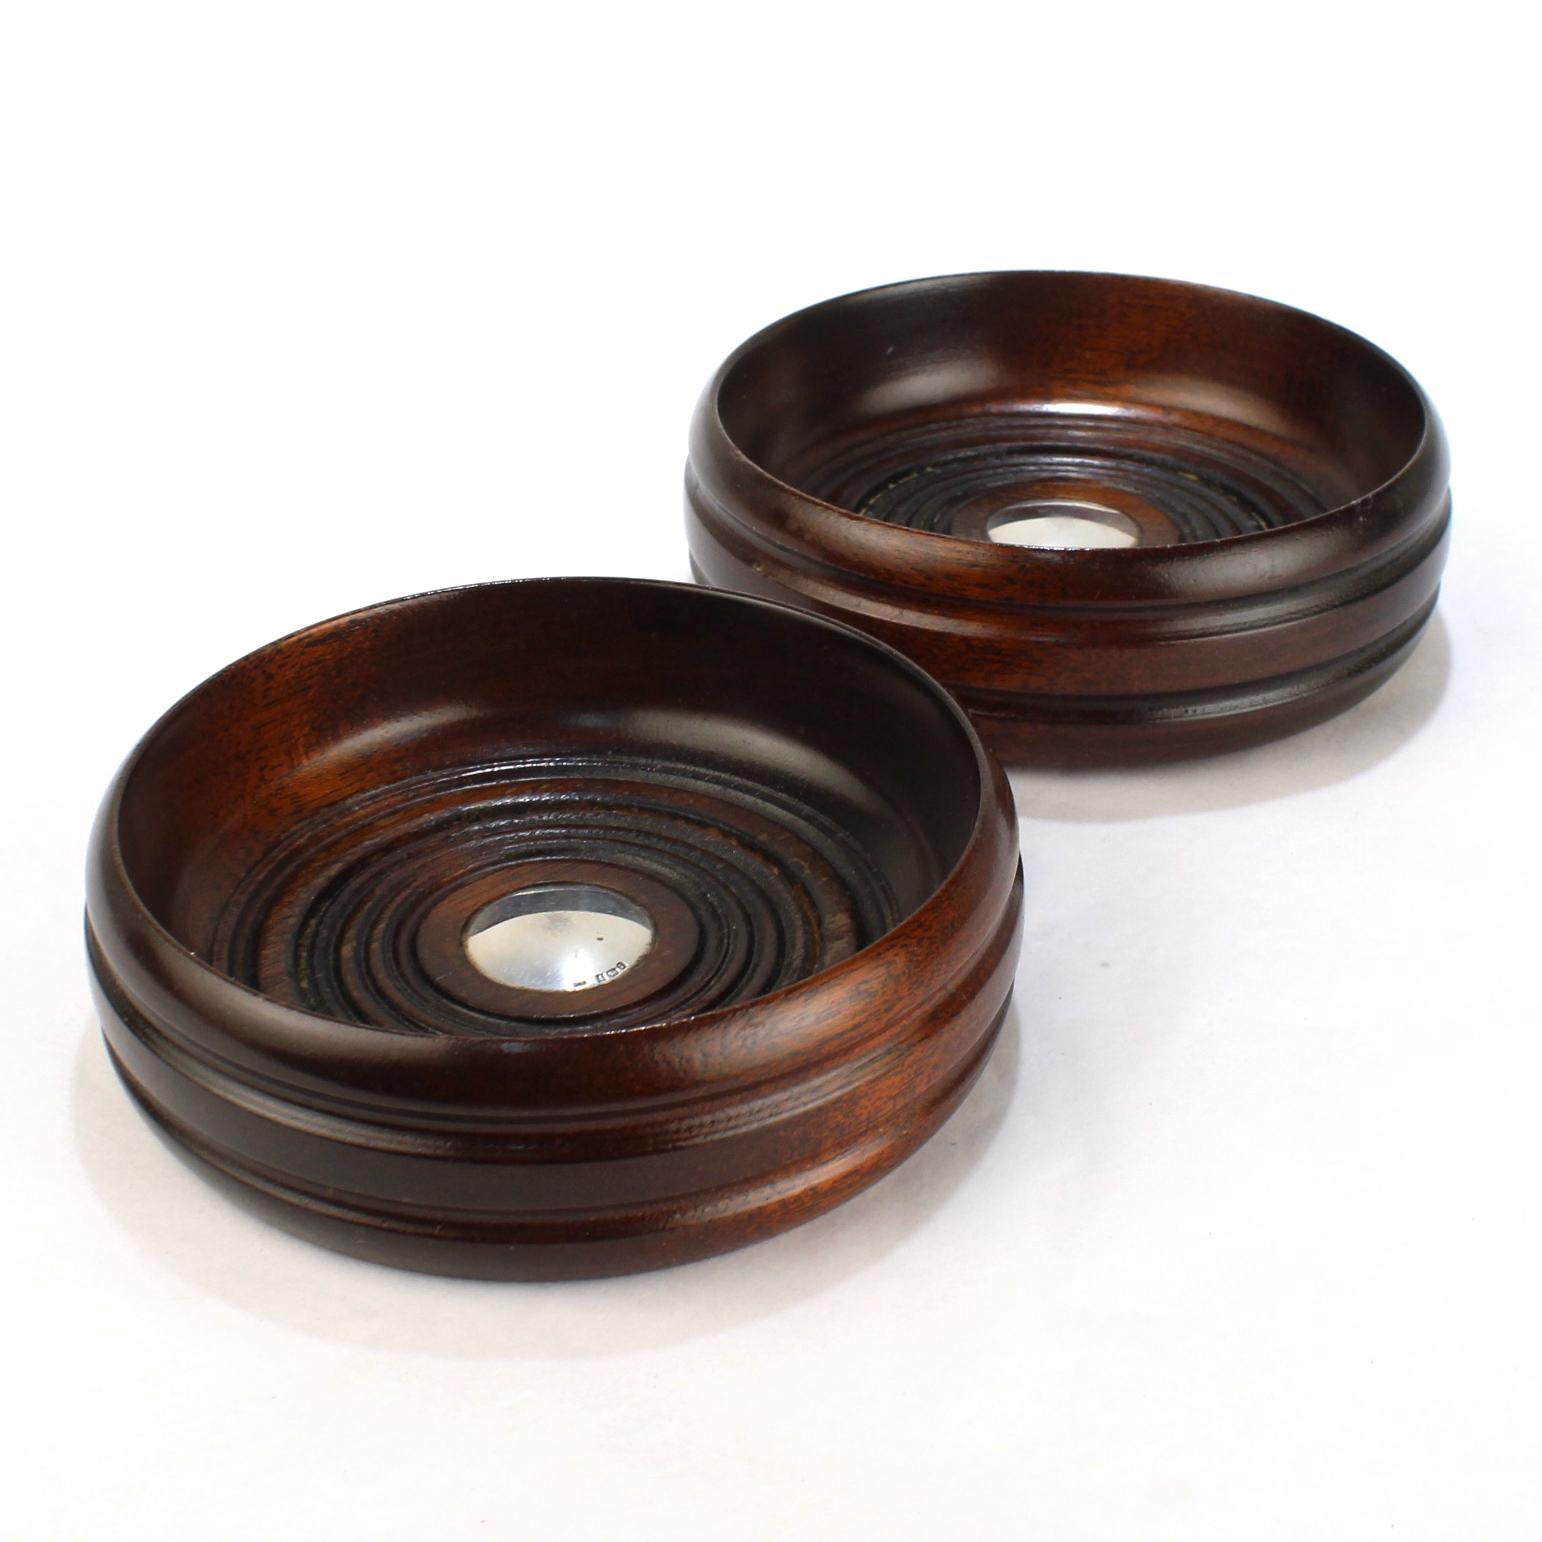 A fine pair of Edwardian style English wine coasters.

Comprised of turned wood (likely mahogany) and mounted with sterling silver buttons to the center. 

By Deakin & Francis of Birmingham. 

Simply a fine pair of coasters for the table!